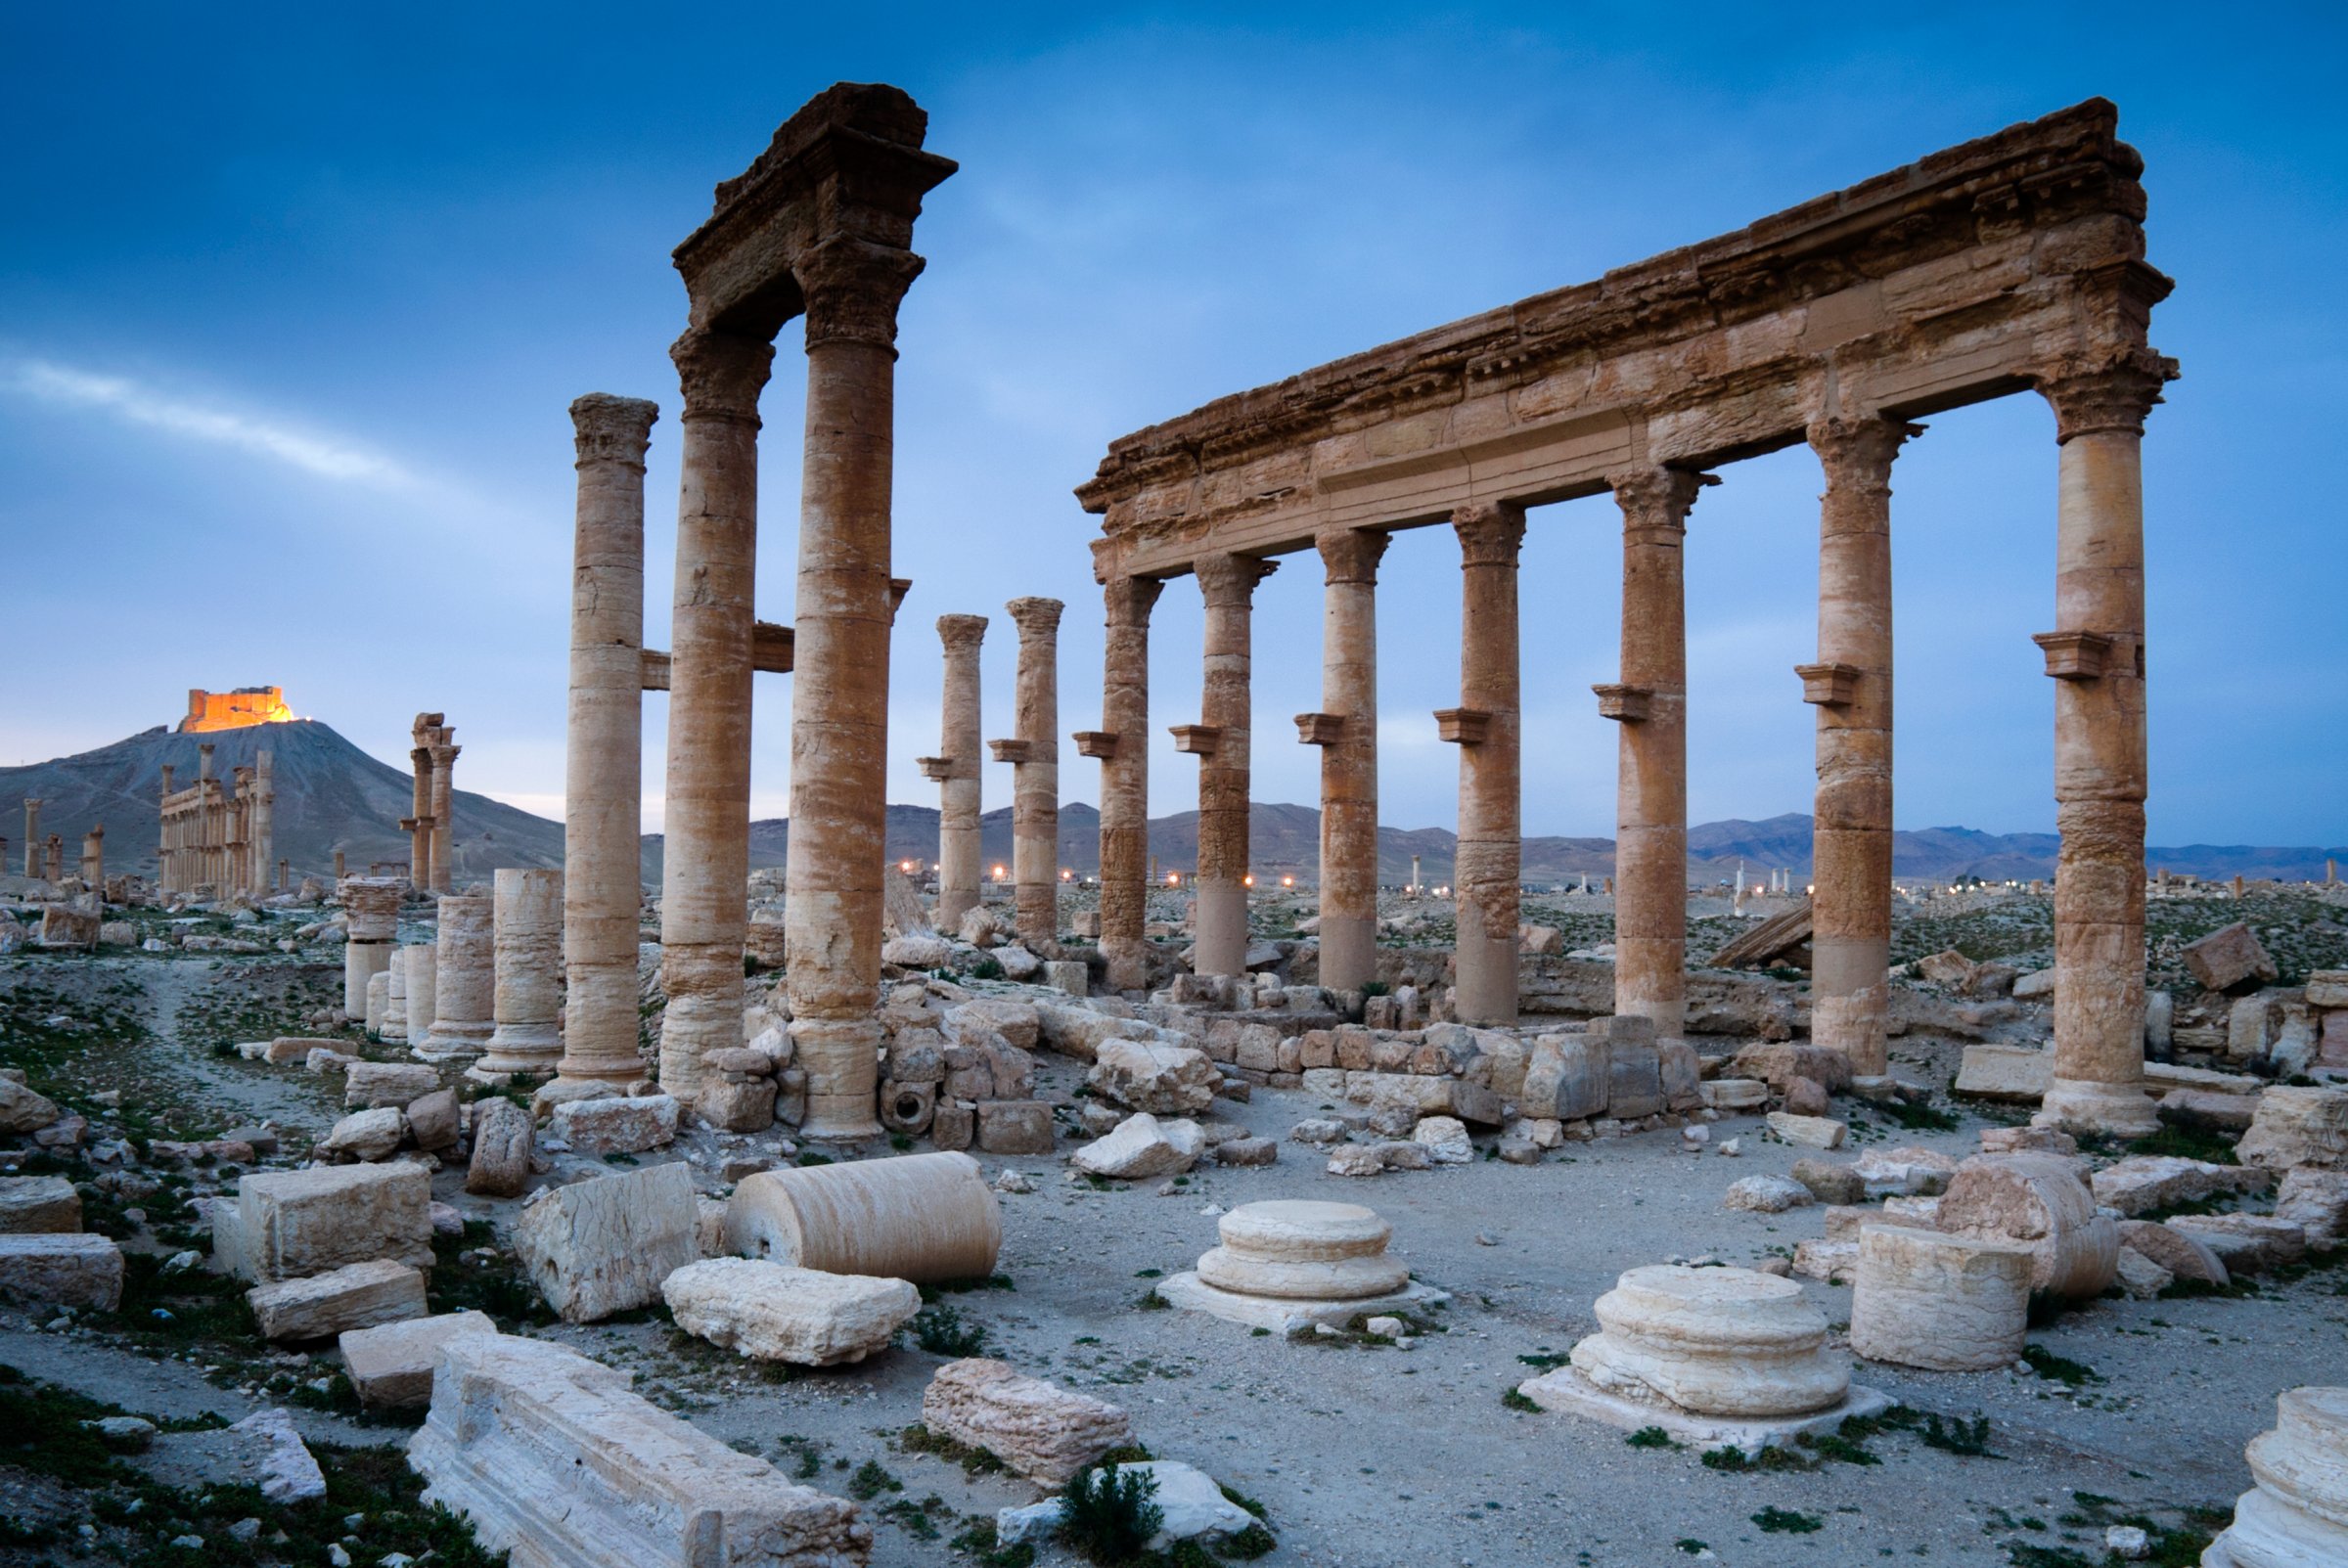 Ruins of Palmyra in Syria